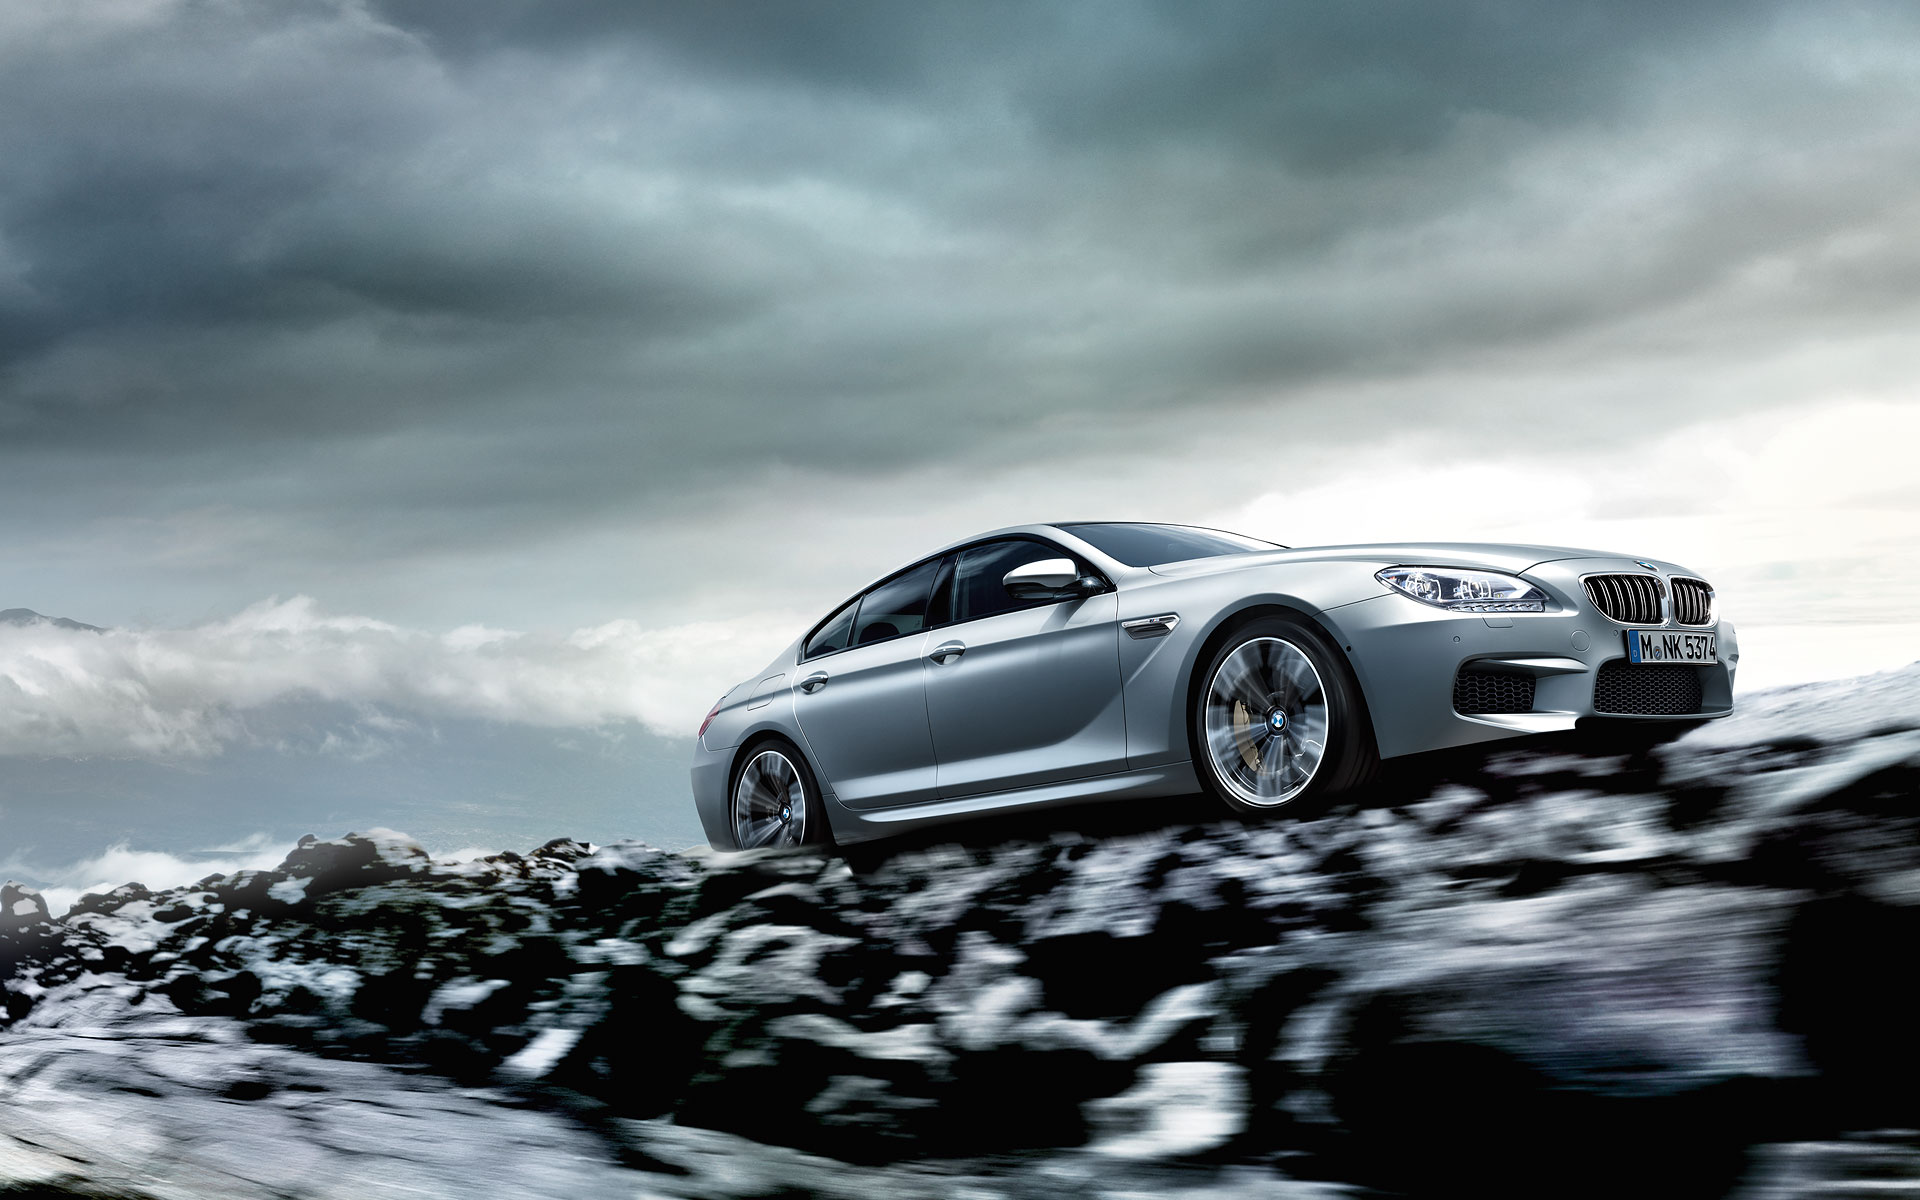 The Primal Force Of The Bmw M6 Bmw M6 Gran Coupe Automotive Photography